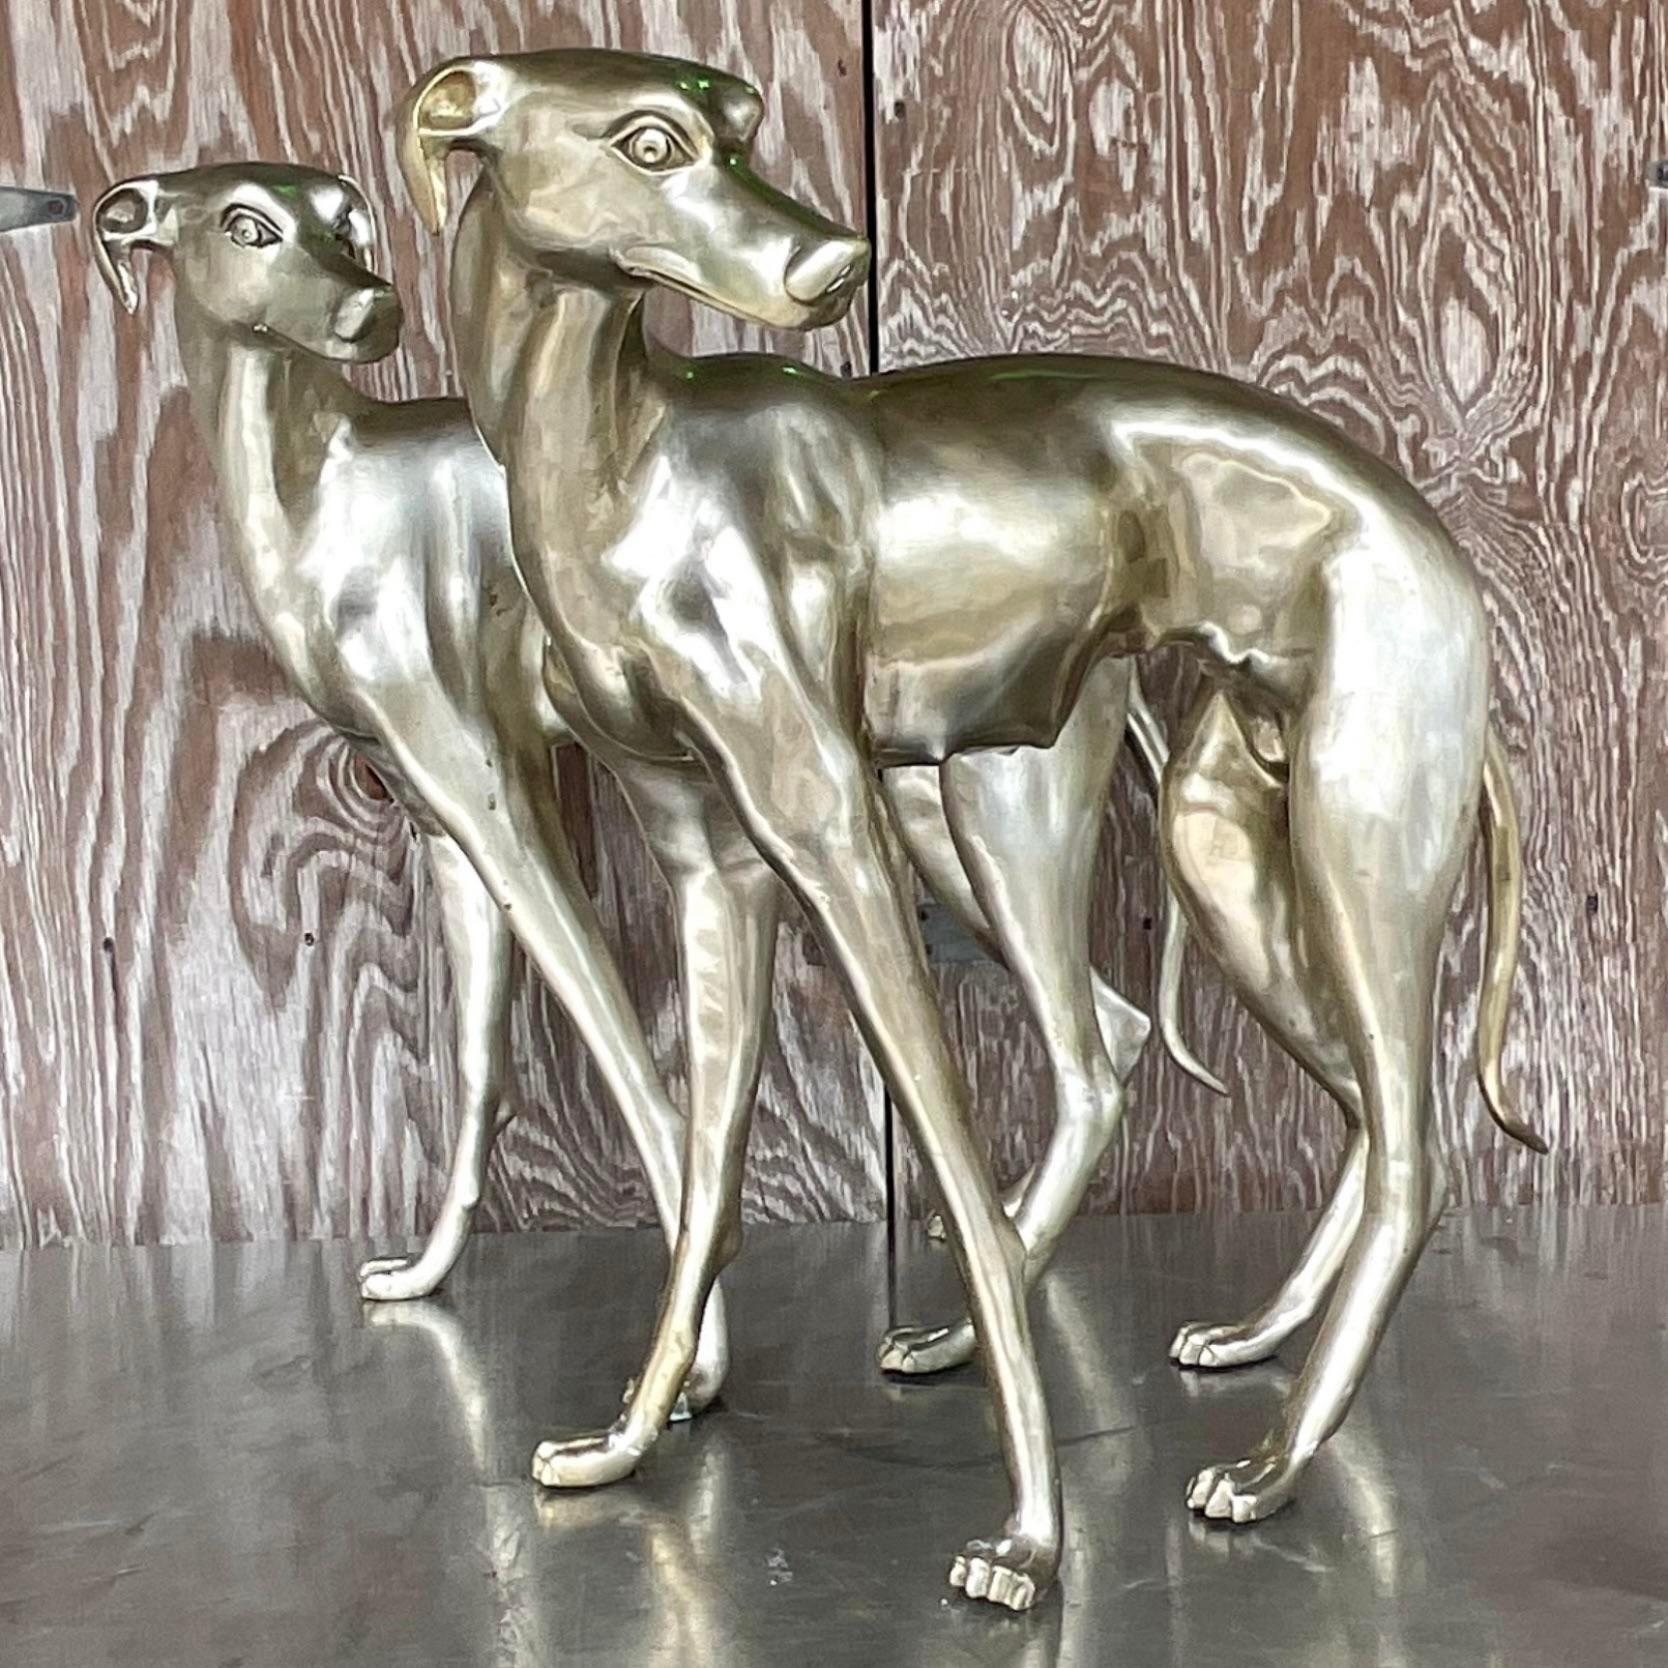 A striking pair of vintage Boho life size dogs. Chic white brass with a gorgeous matte finish. Tall and impressive. Acquired from a Palm Beach estate. 